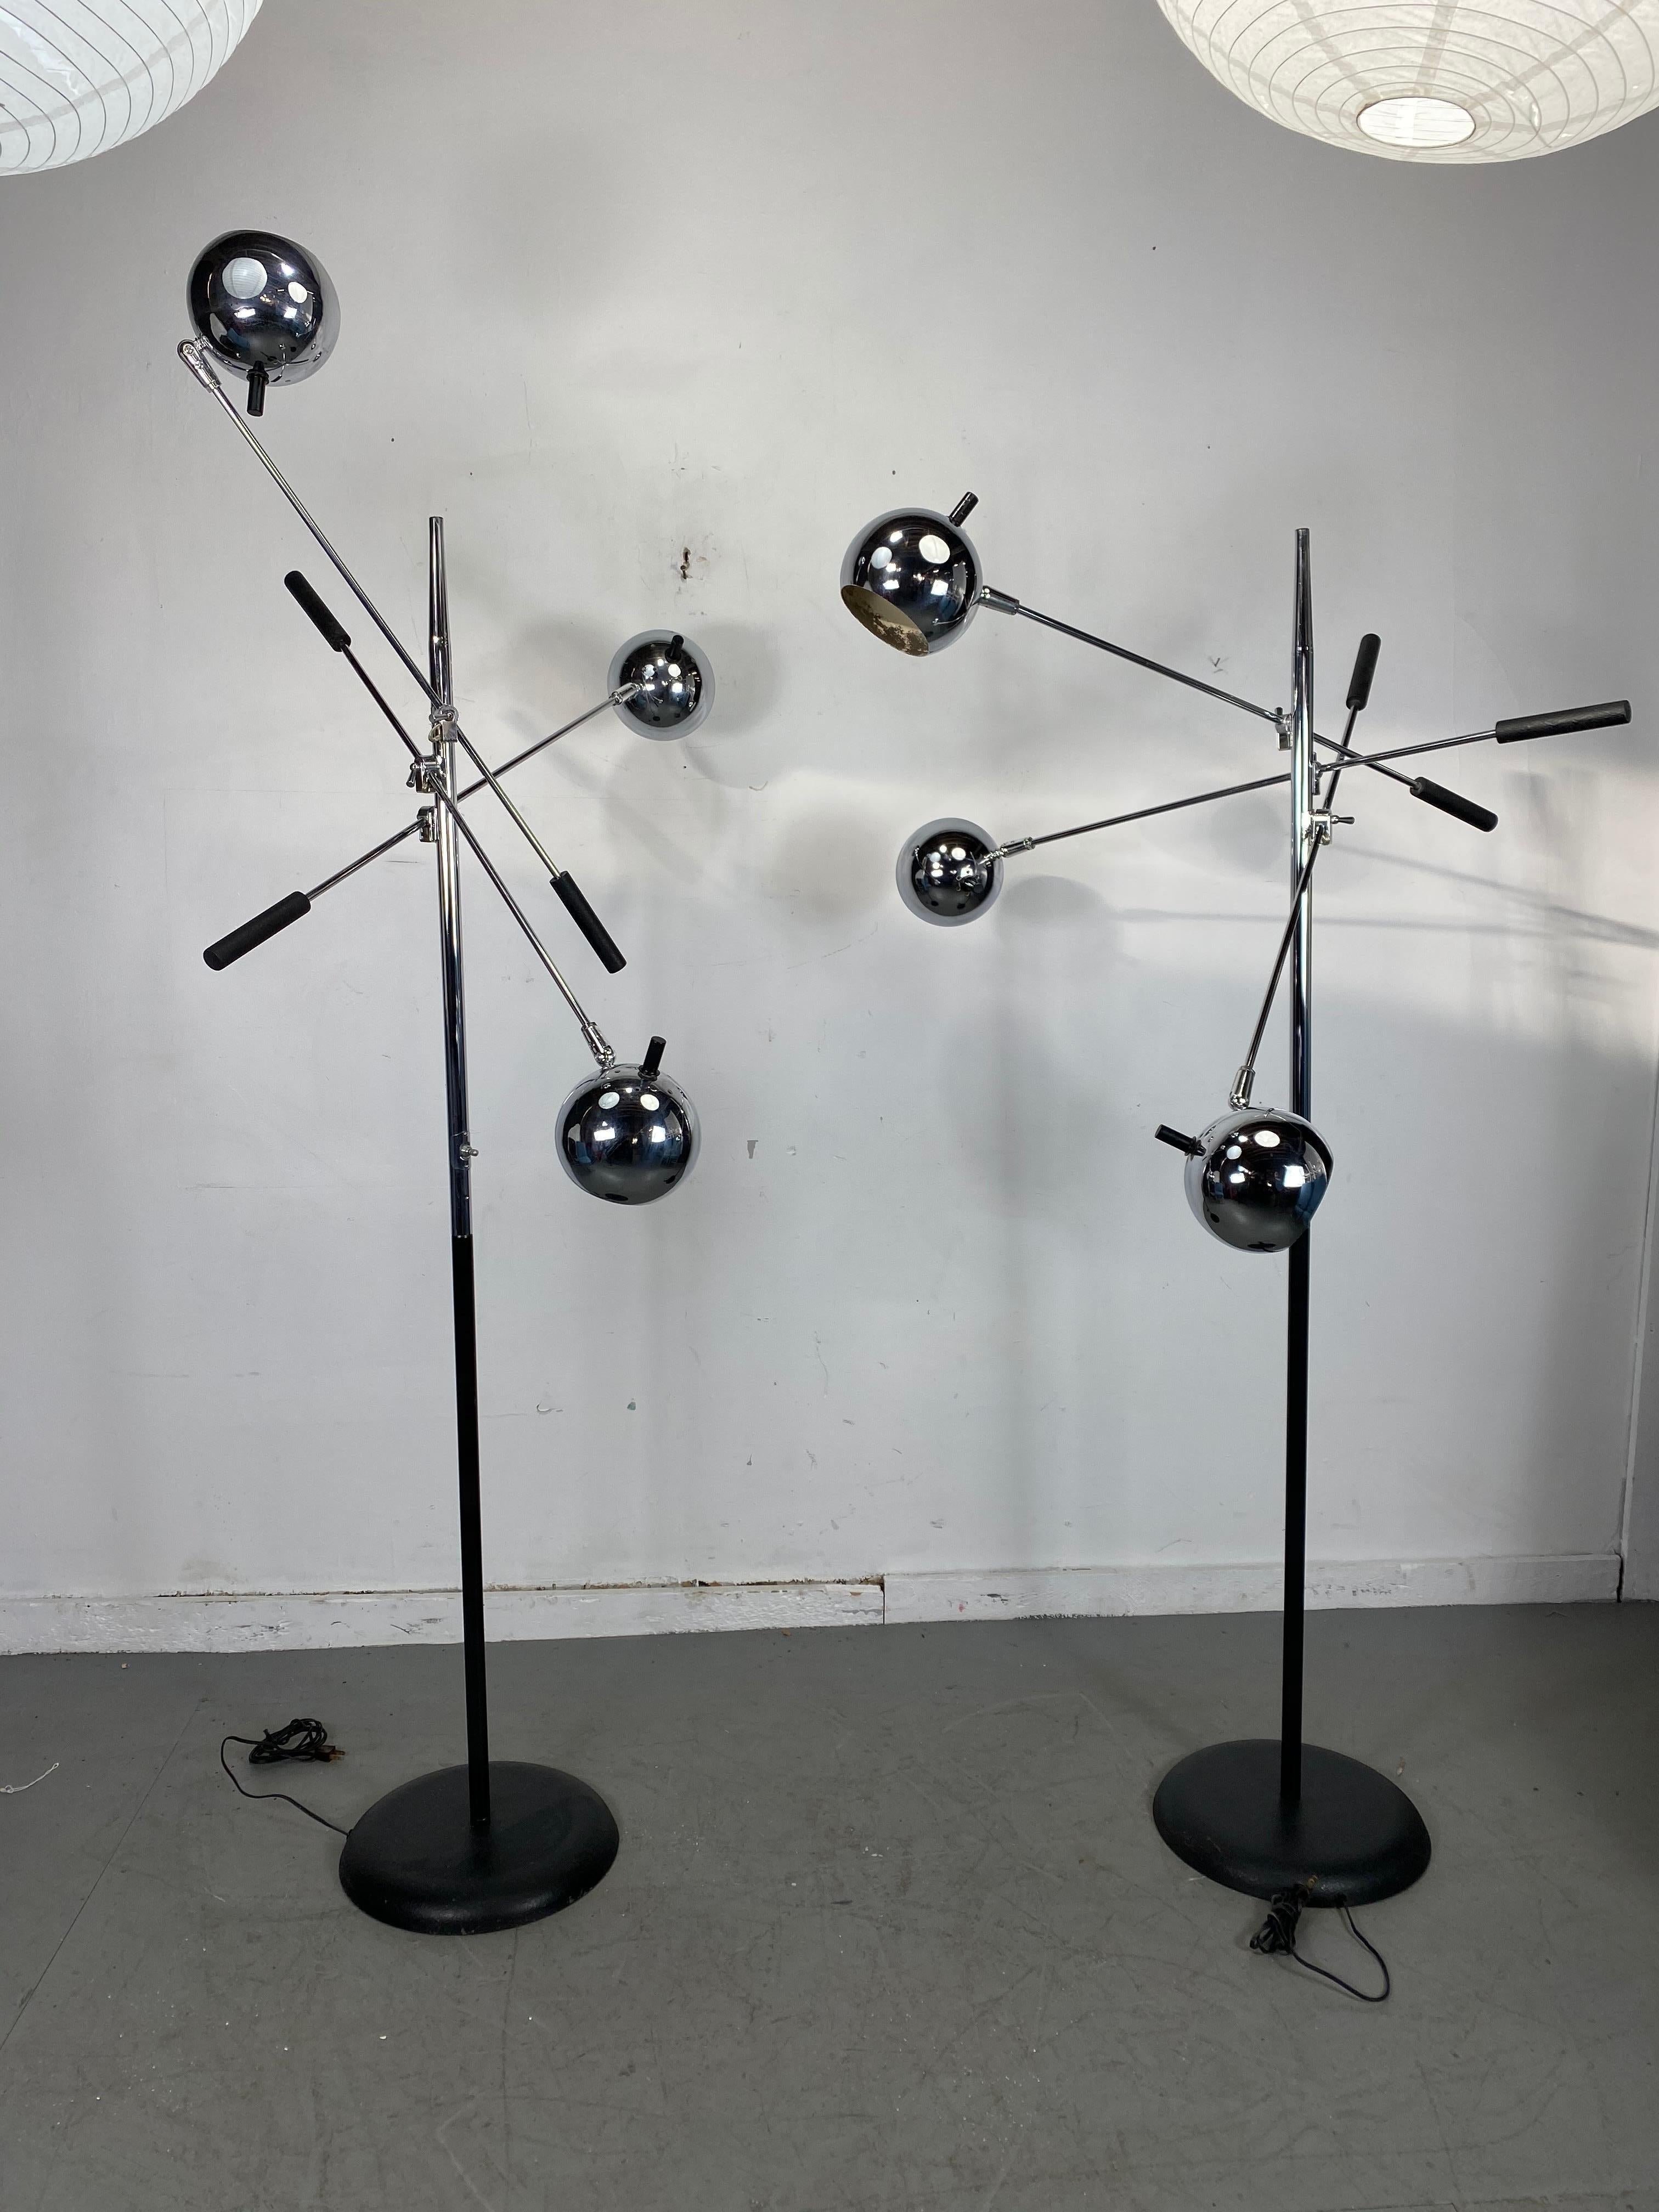 Matching pair of Space Age Robert Sonneman Triennale Atomic Orbiter floor lamp.
Classic modernist lighting, great original condition, in the style of Arredoluce, Hand delivery avail to New York City or anywhere en route from Buffalo NY.